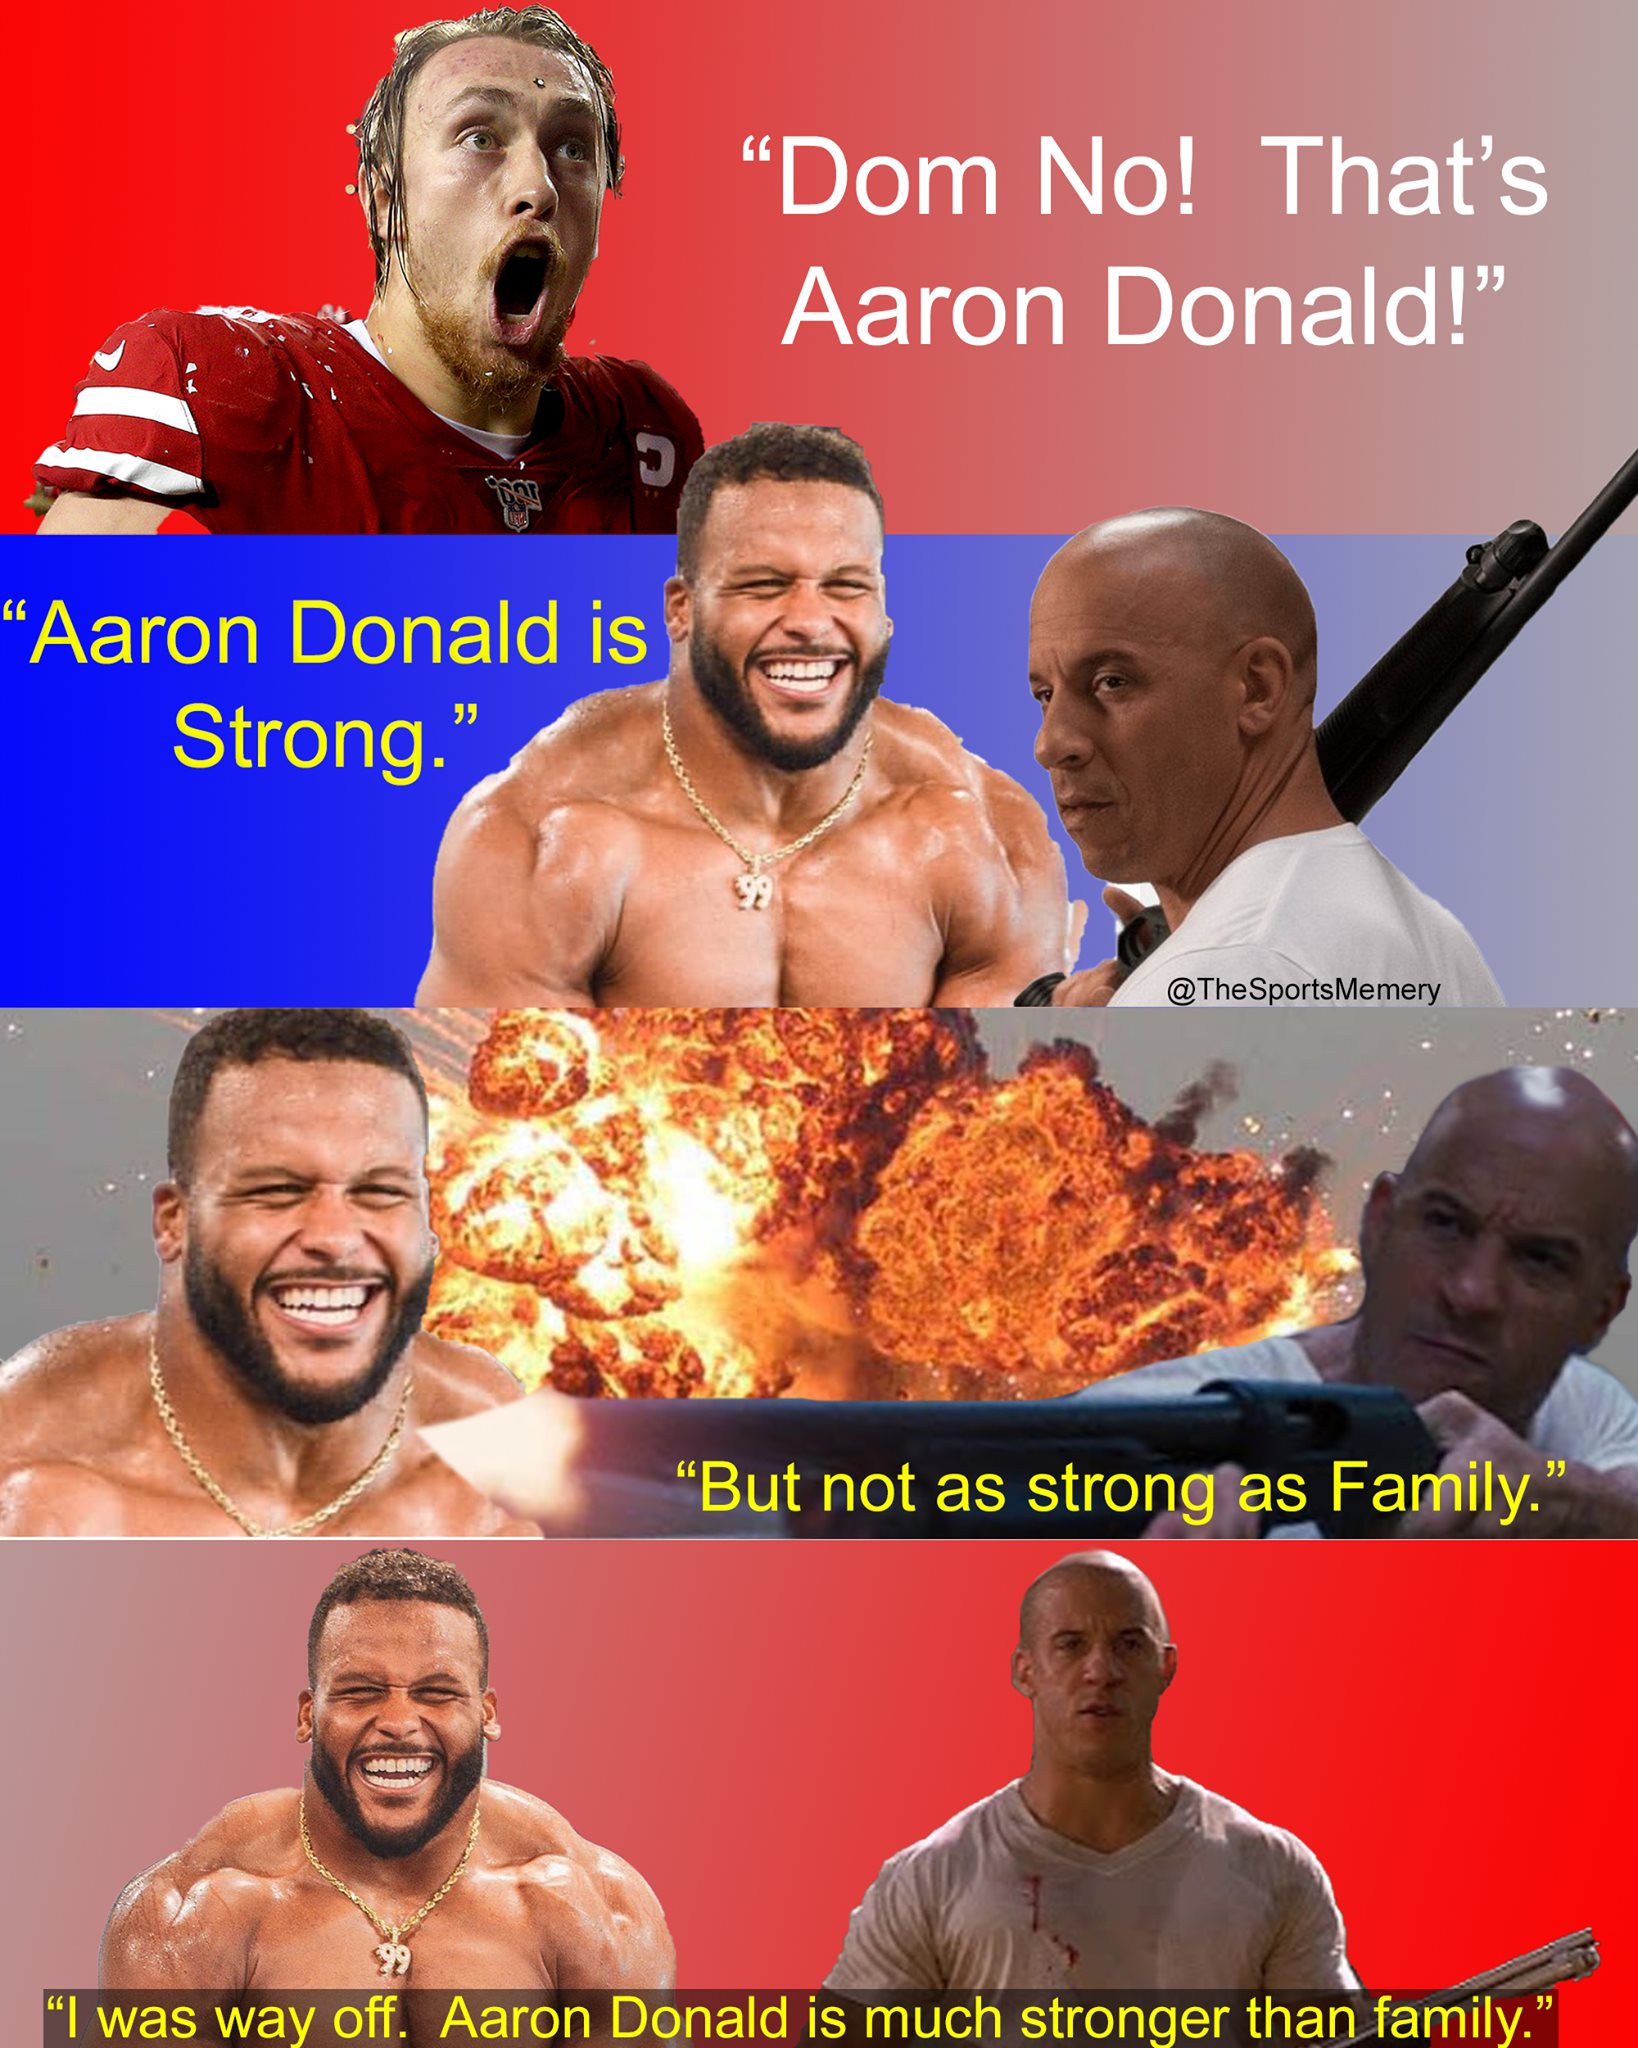 "Dom No! That's Aaron Donald!" "Aaron Donald is Strong." "But not as strong as Family" "I was way off. Aaron Donald is much stronger than family."